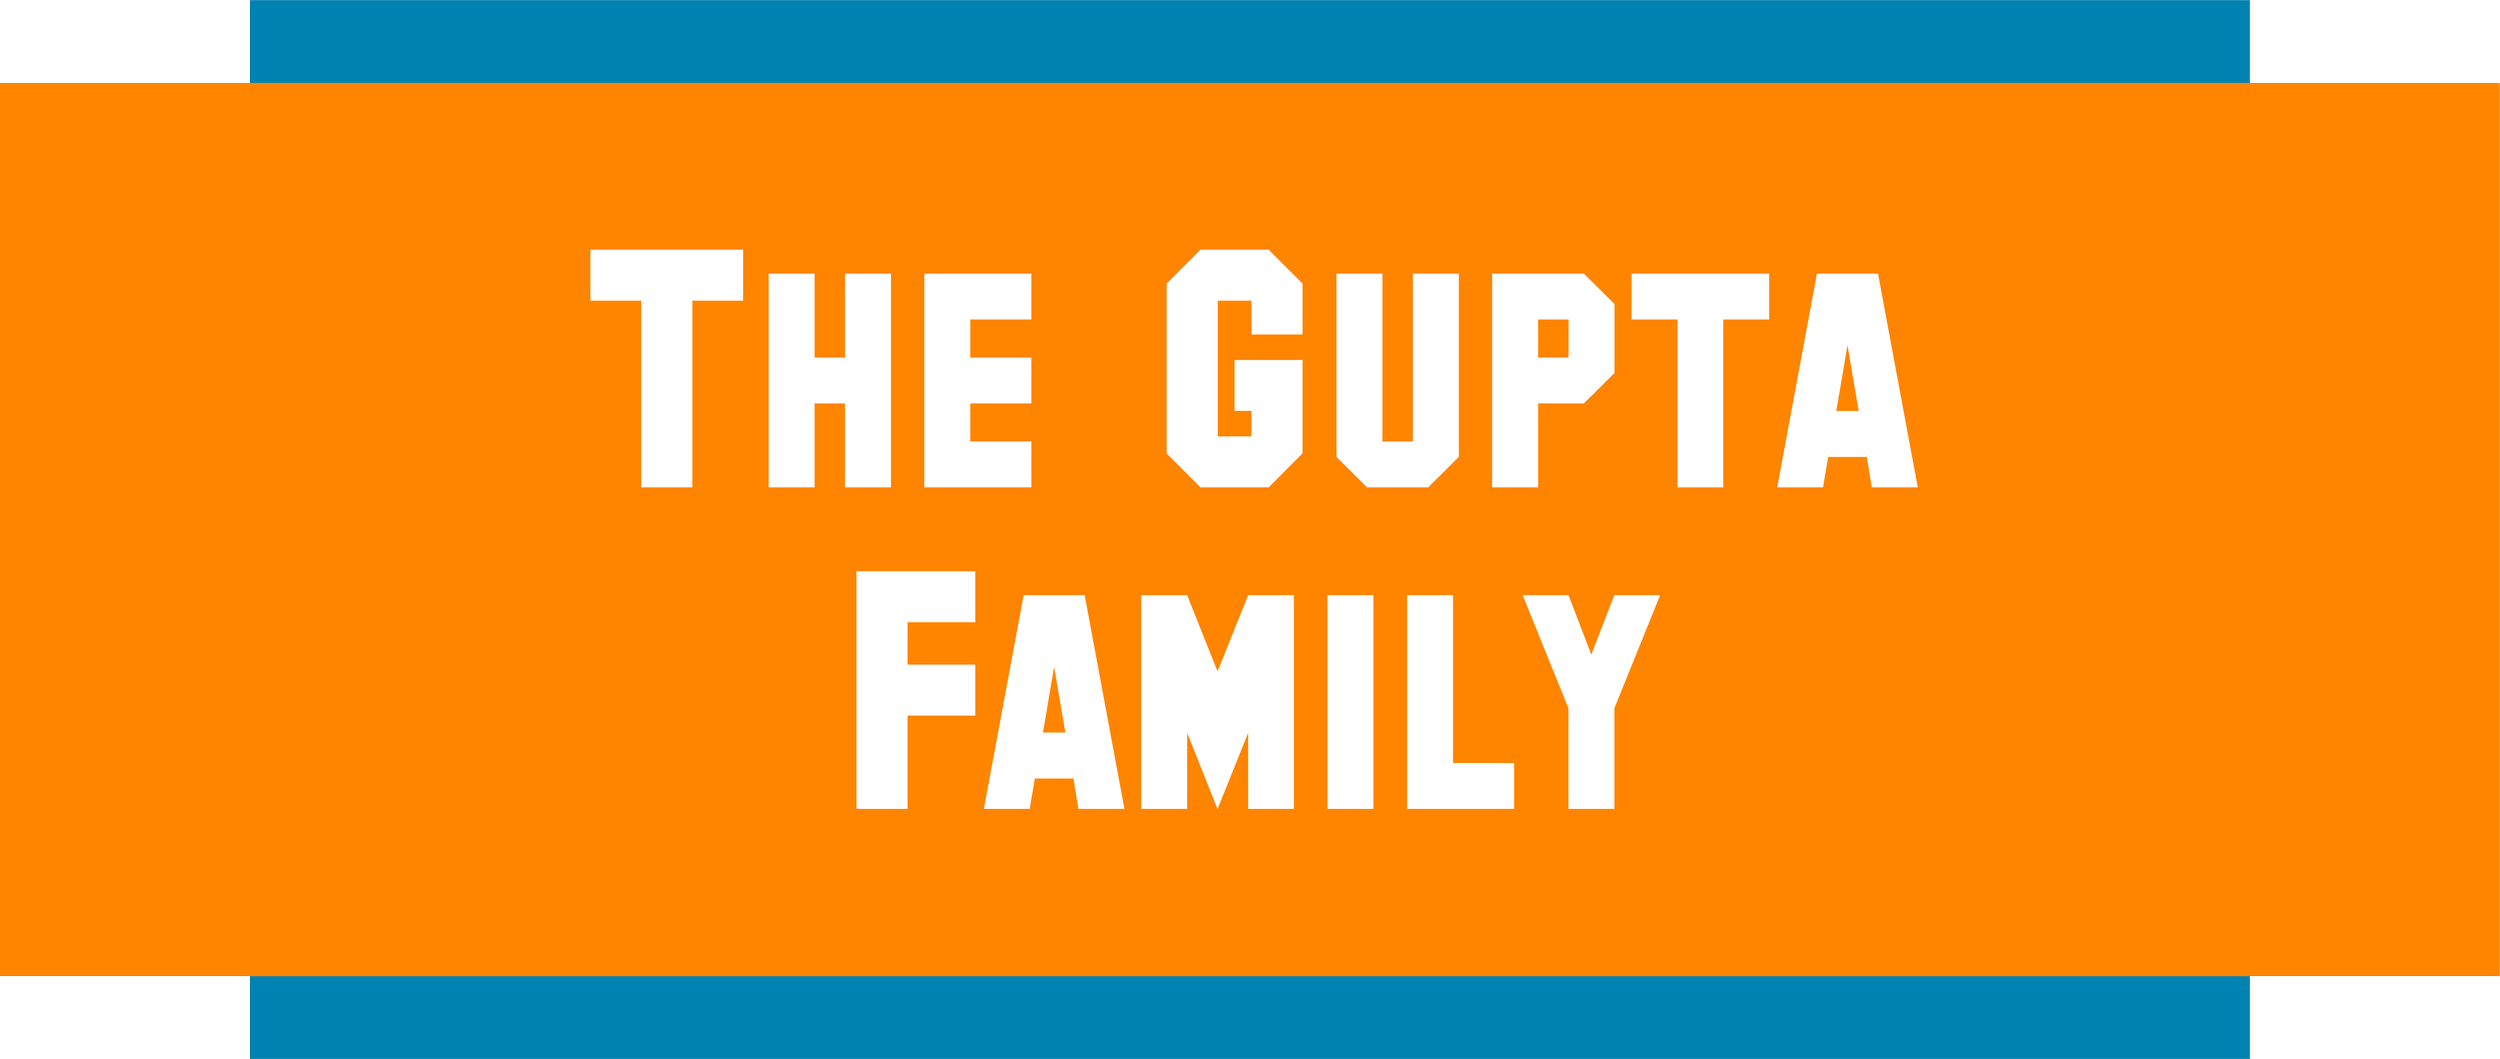 The Gupta Family.png